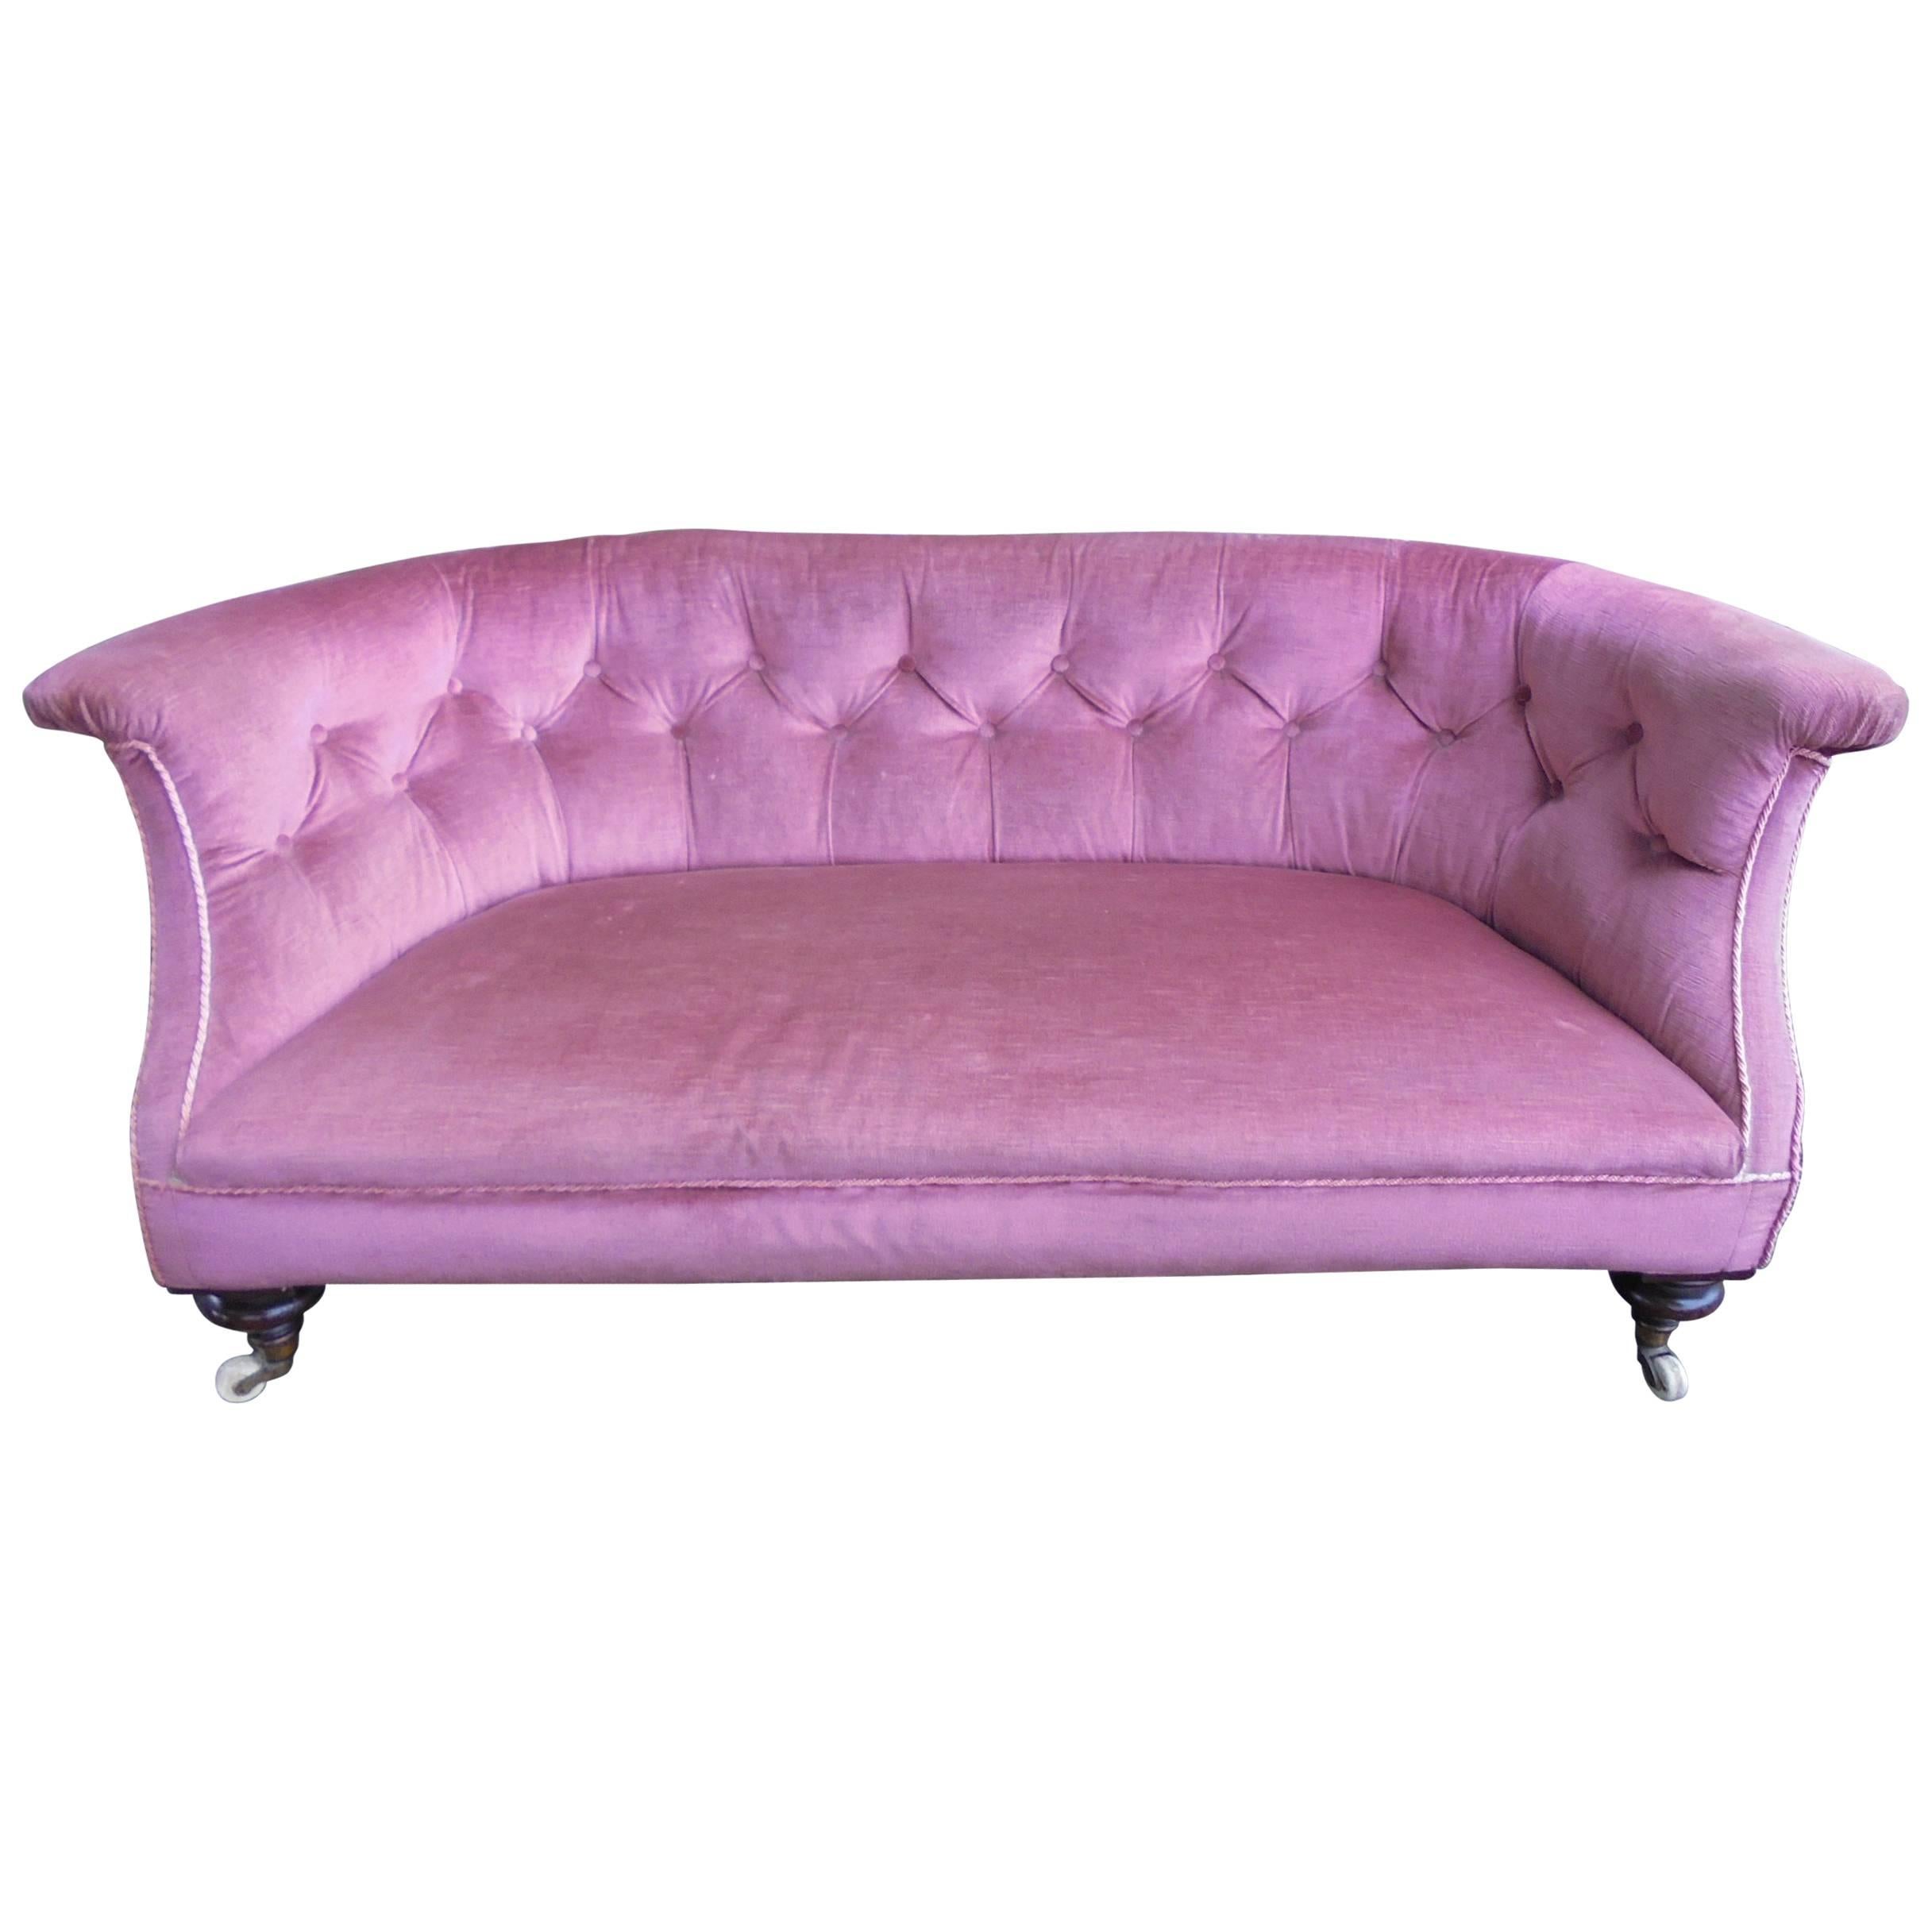 Small Antique English Upholstered Sofa